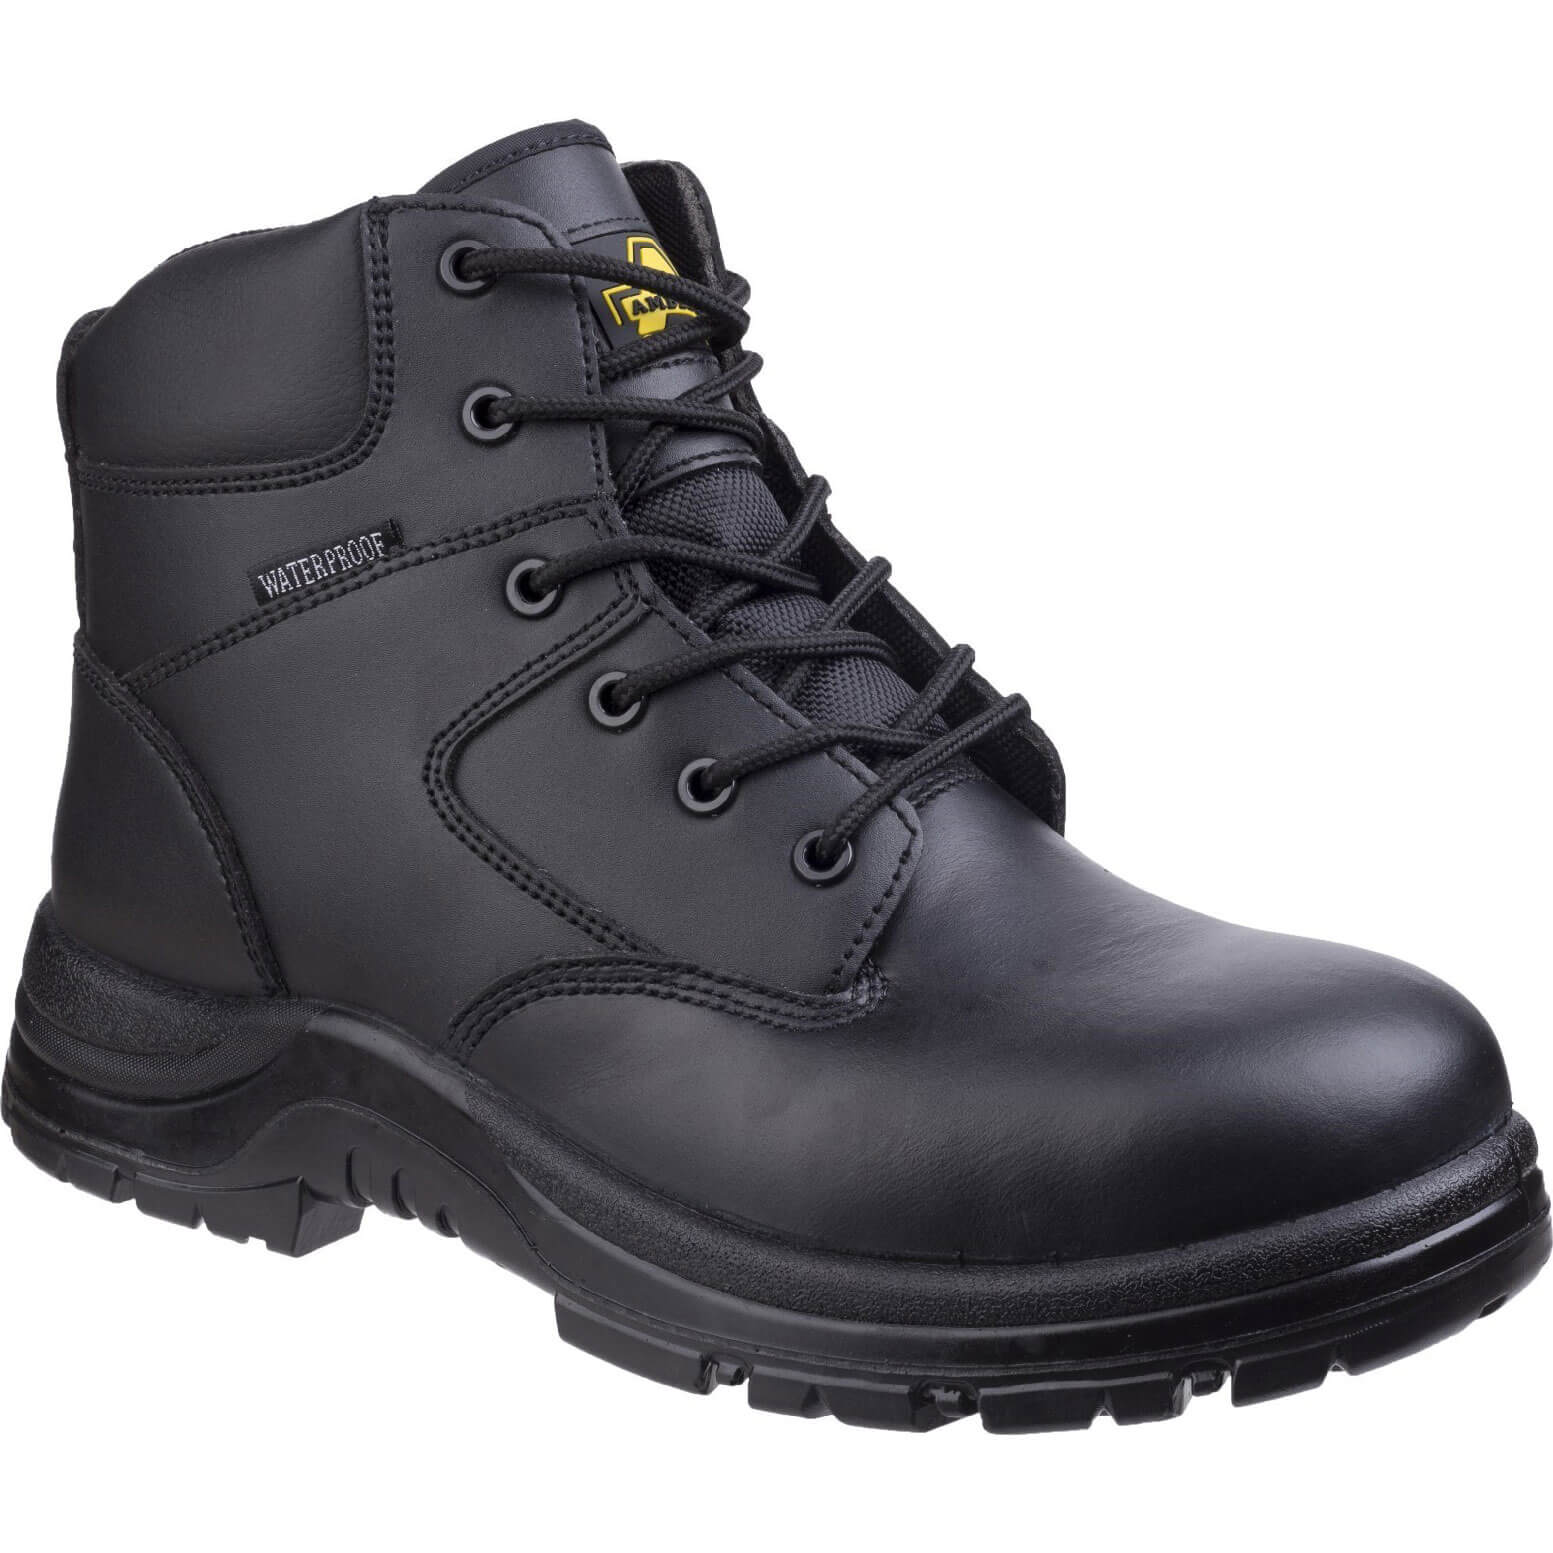 Amblers Mens Safety FS006C Metal Free Waterproof Safety Boots Black Size 11